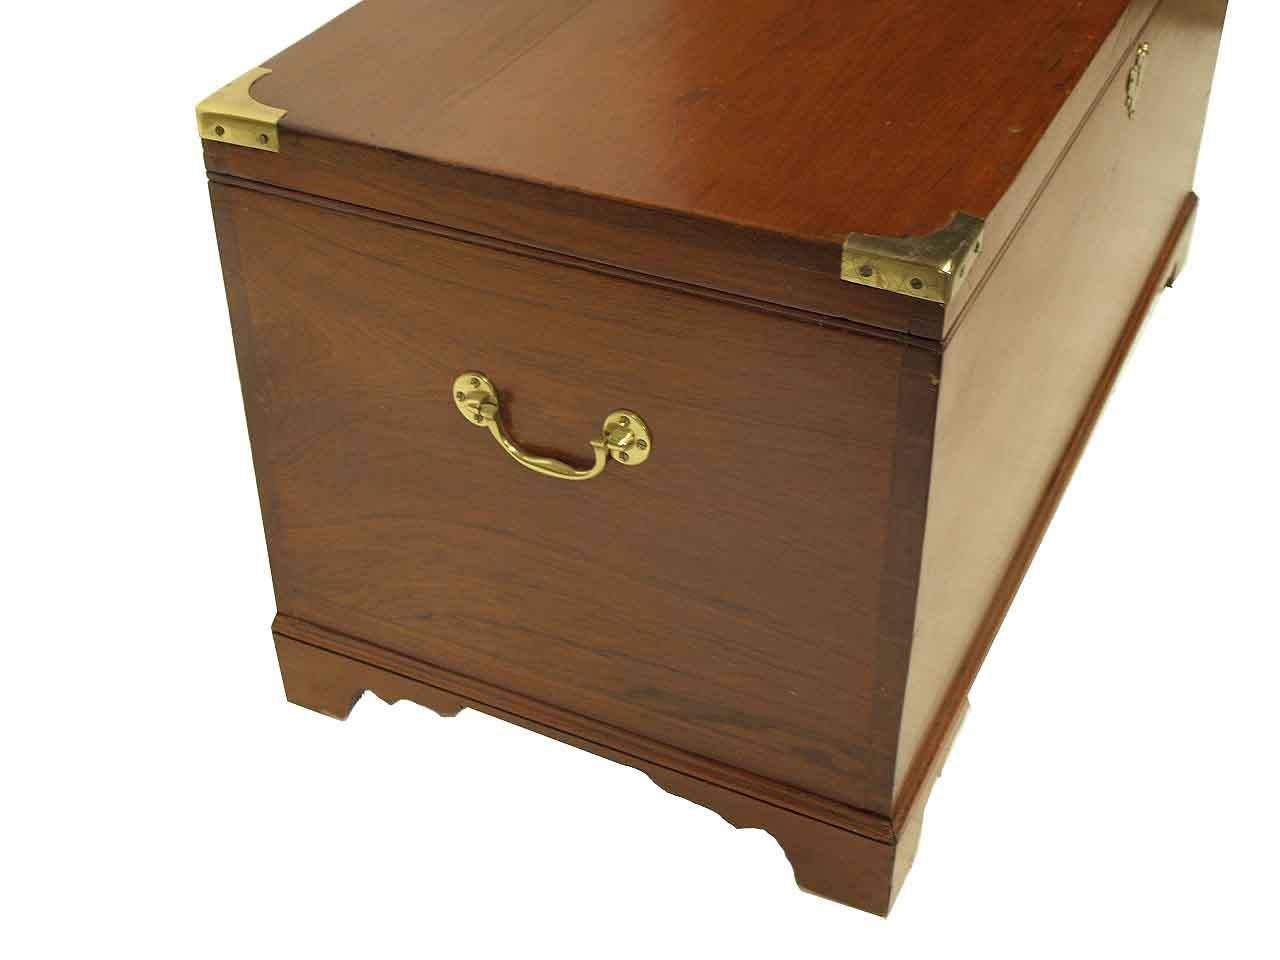 English teak wood blanket chest, the top with brass bound corners, sides with brass carrying handles; open interior, resting on bracket feet. This chest is an excellent size to serve as a coffee table.